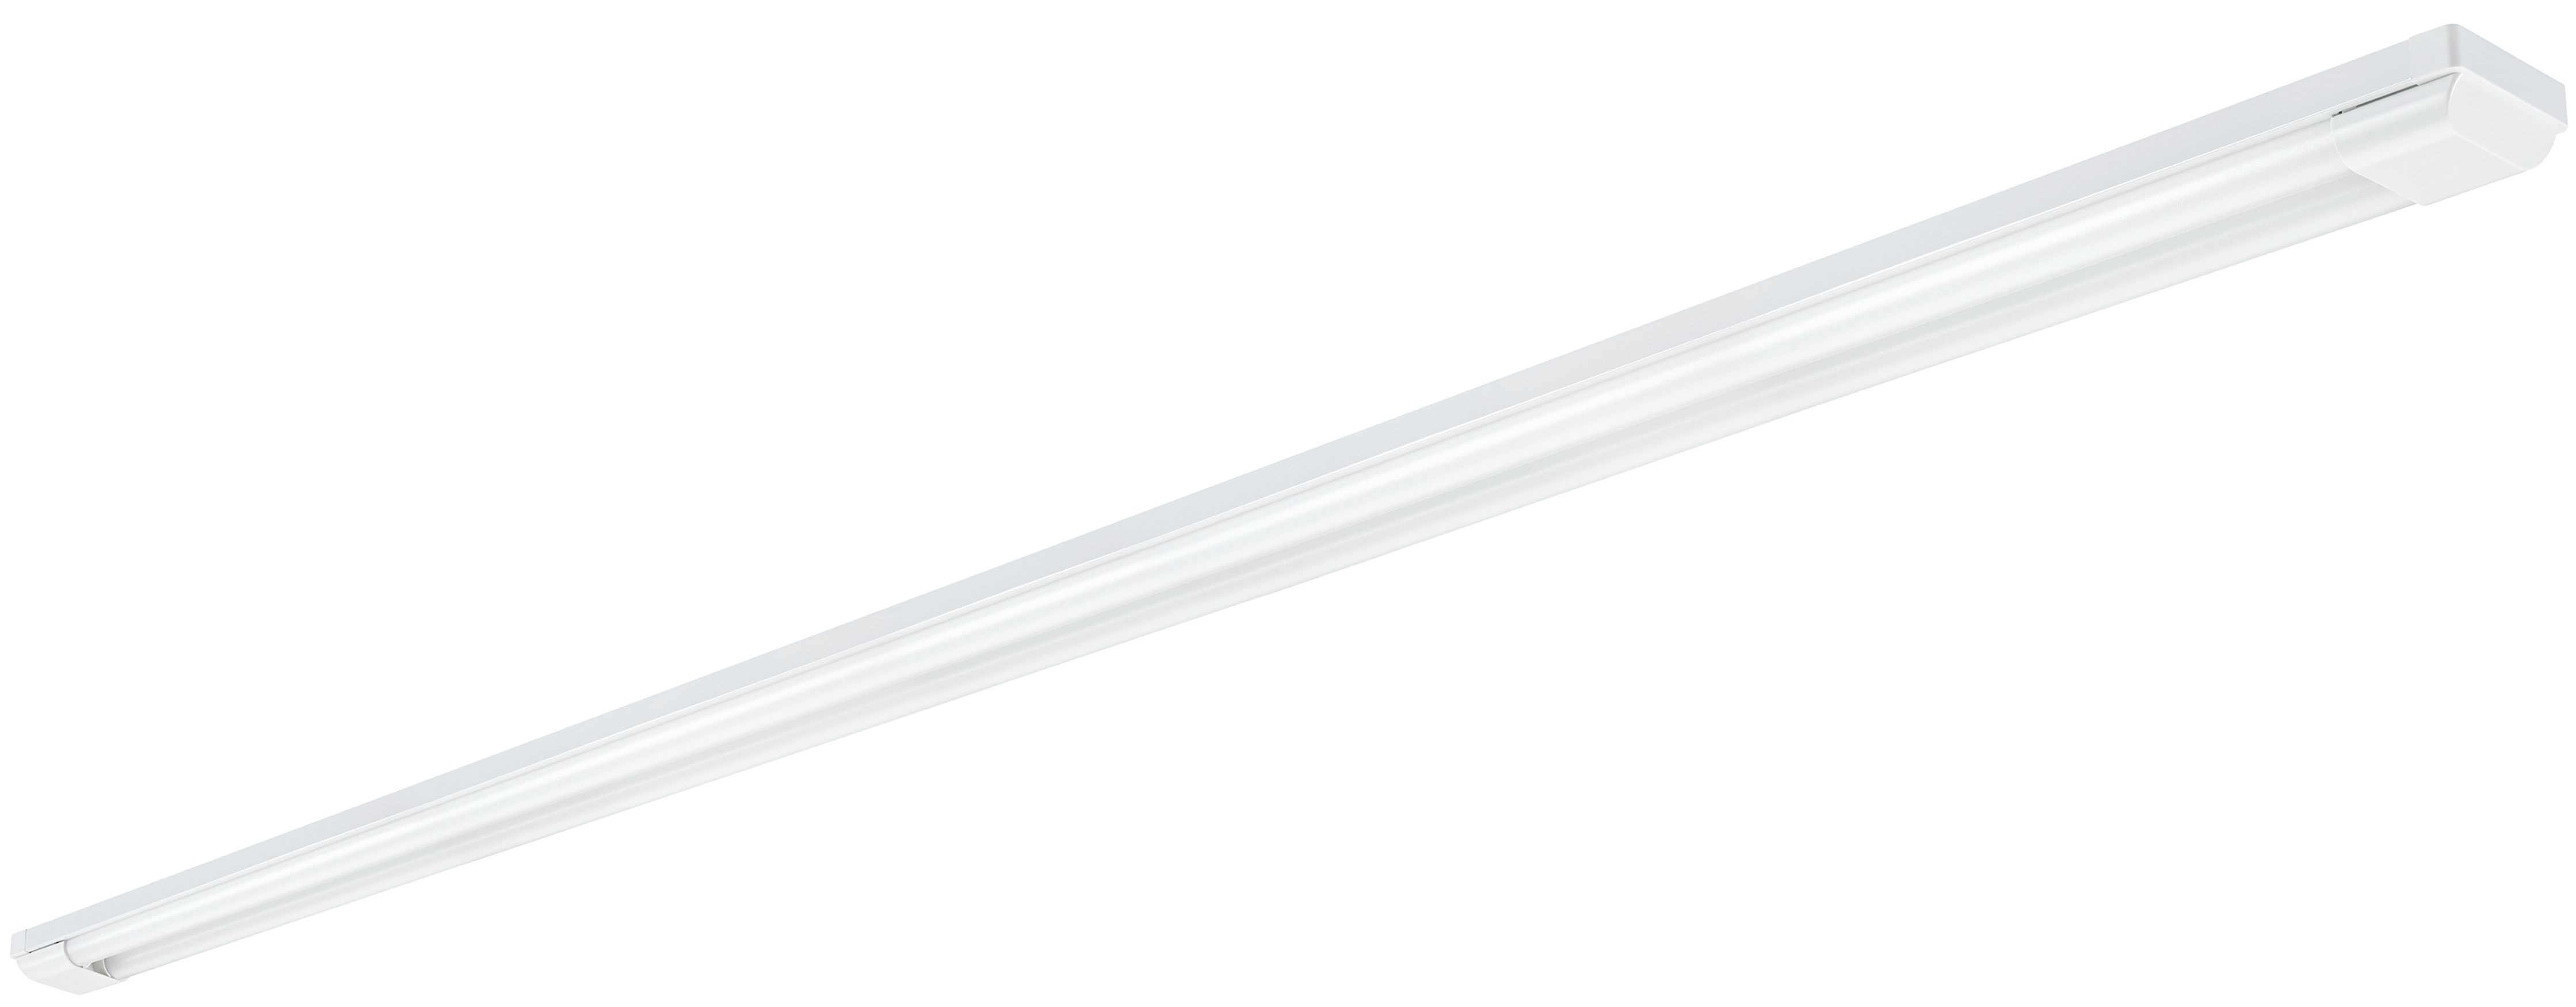 Image of Sylvania Twin 6ft IP20 Light Fitting with T8 Integrated LED Tube - 48W